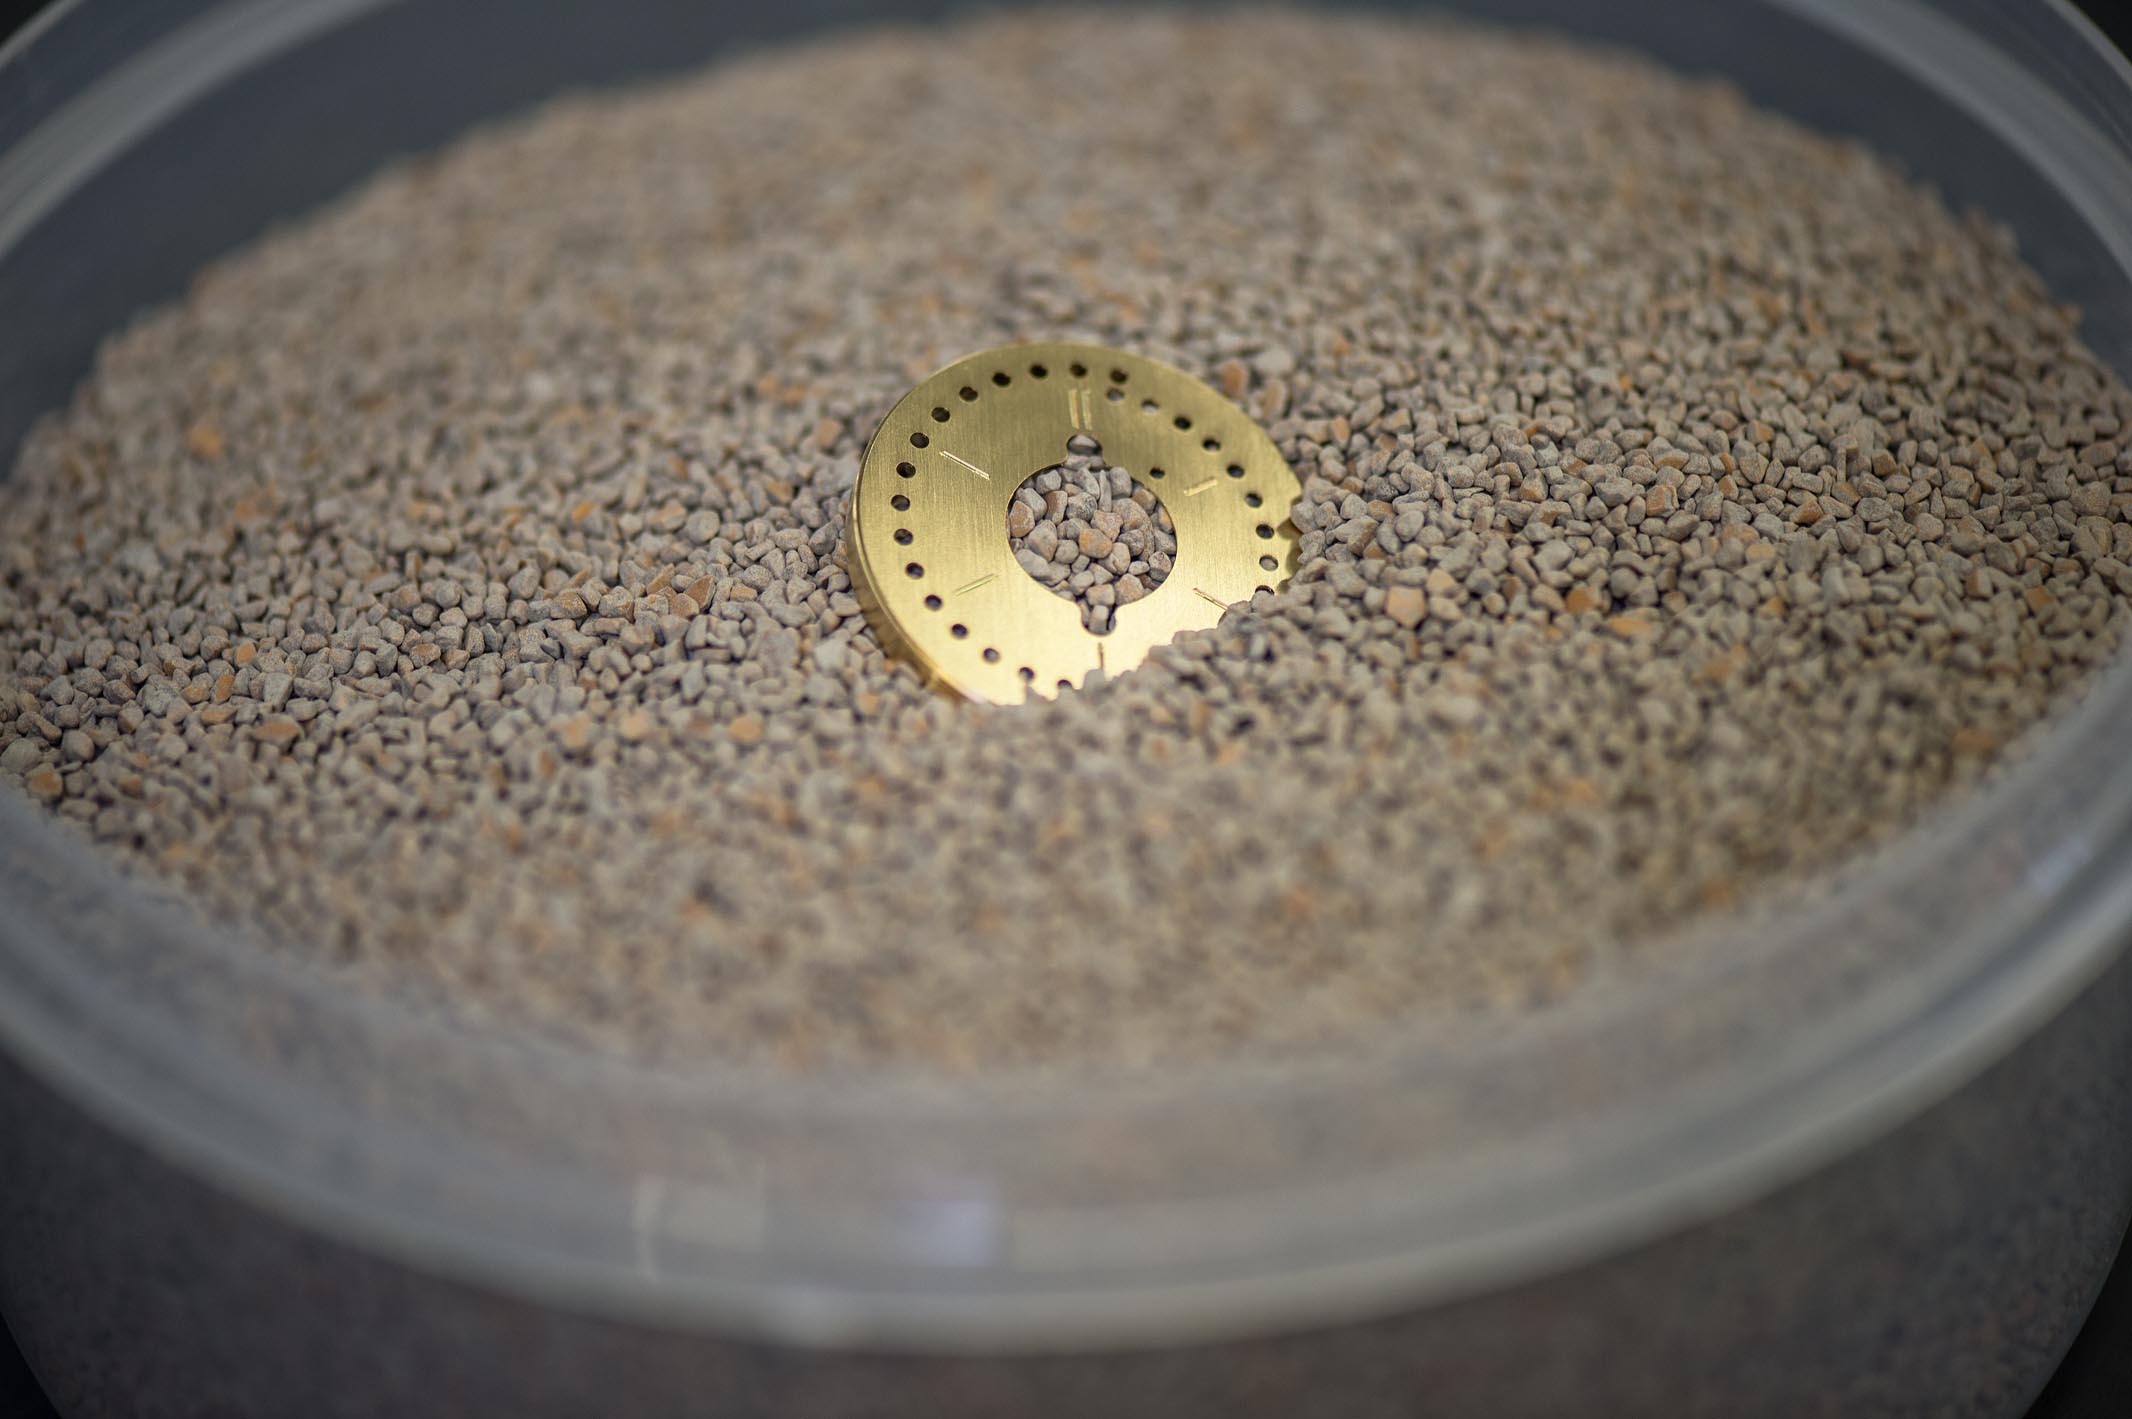 At the end, the dial undergoes several hours of vibratory finishing in a granulate made of nut shells. This breaks/polishes off any remaining artifacts from the production process, but preserves the milled surface structure.